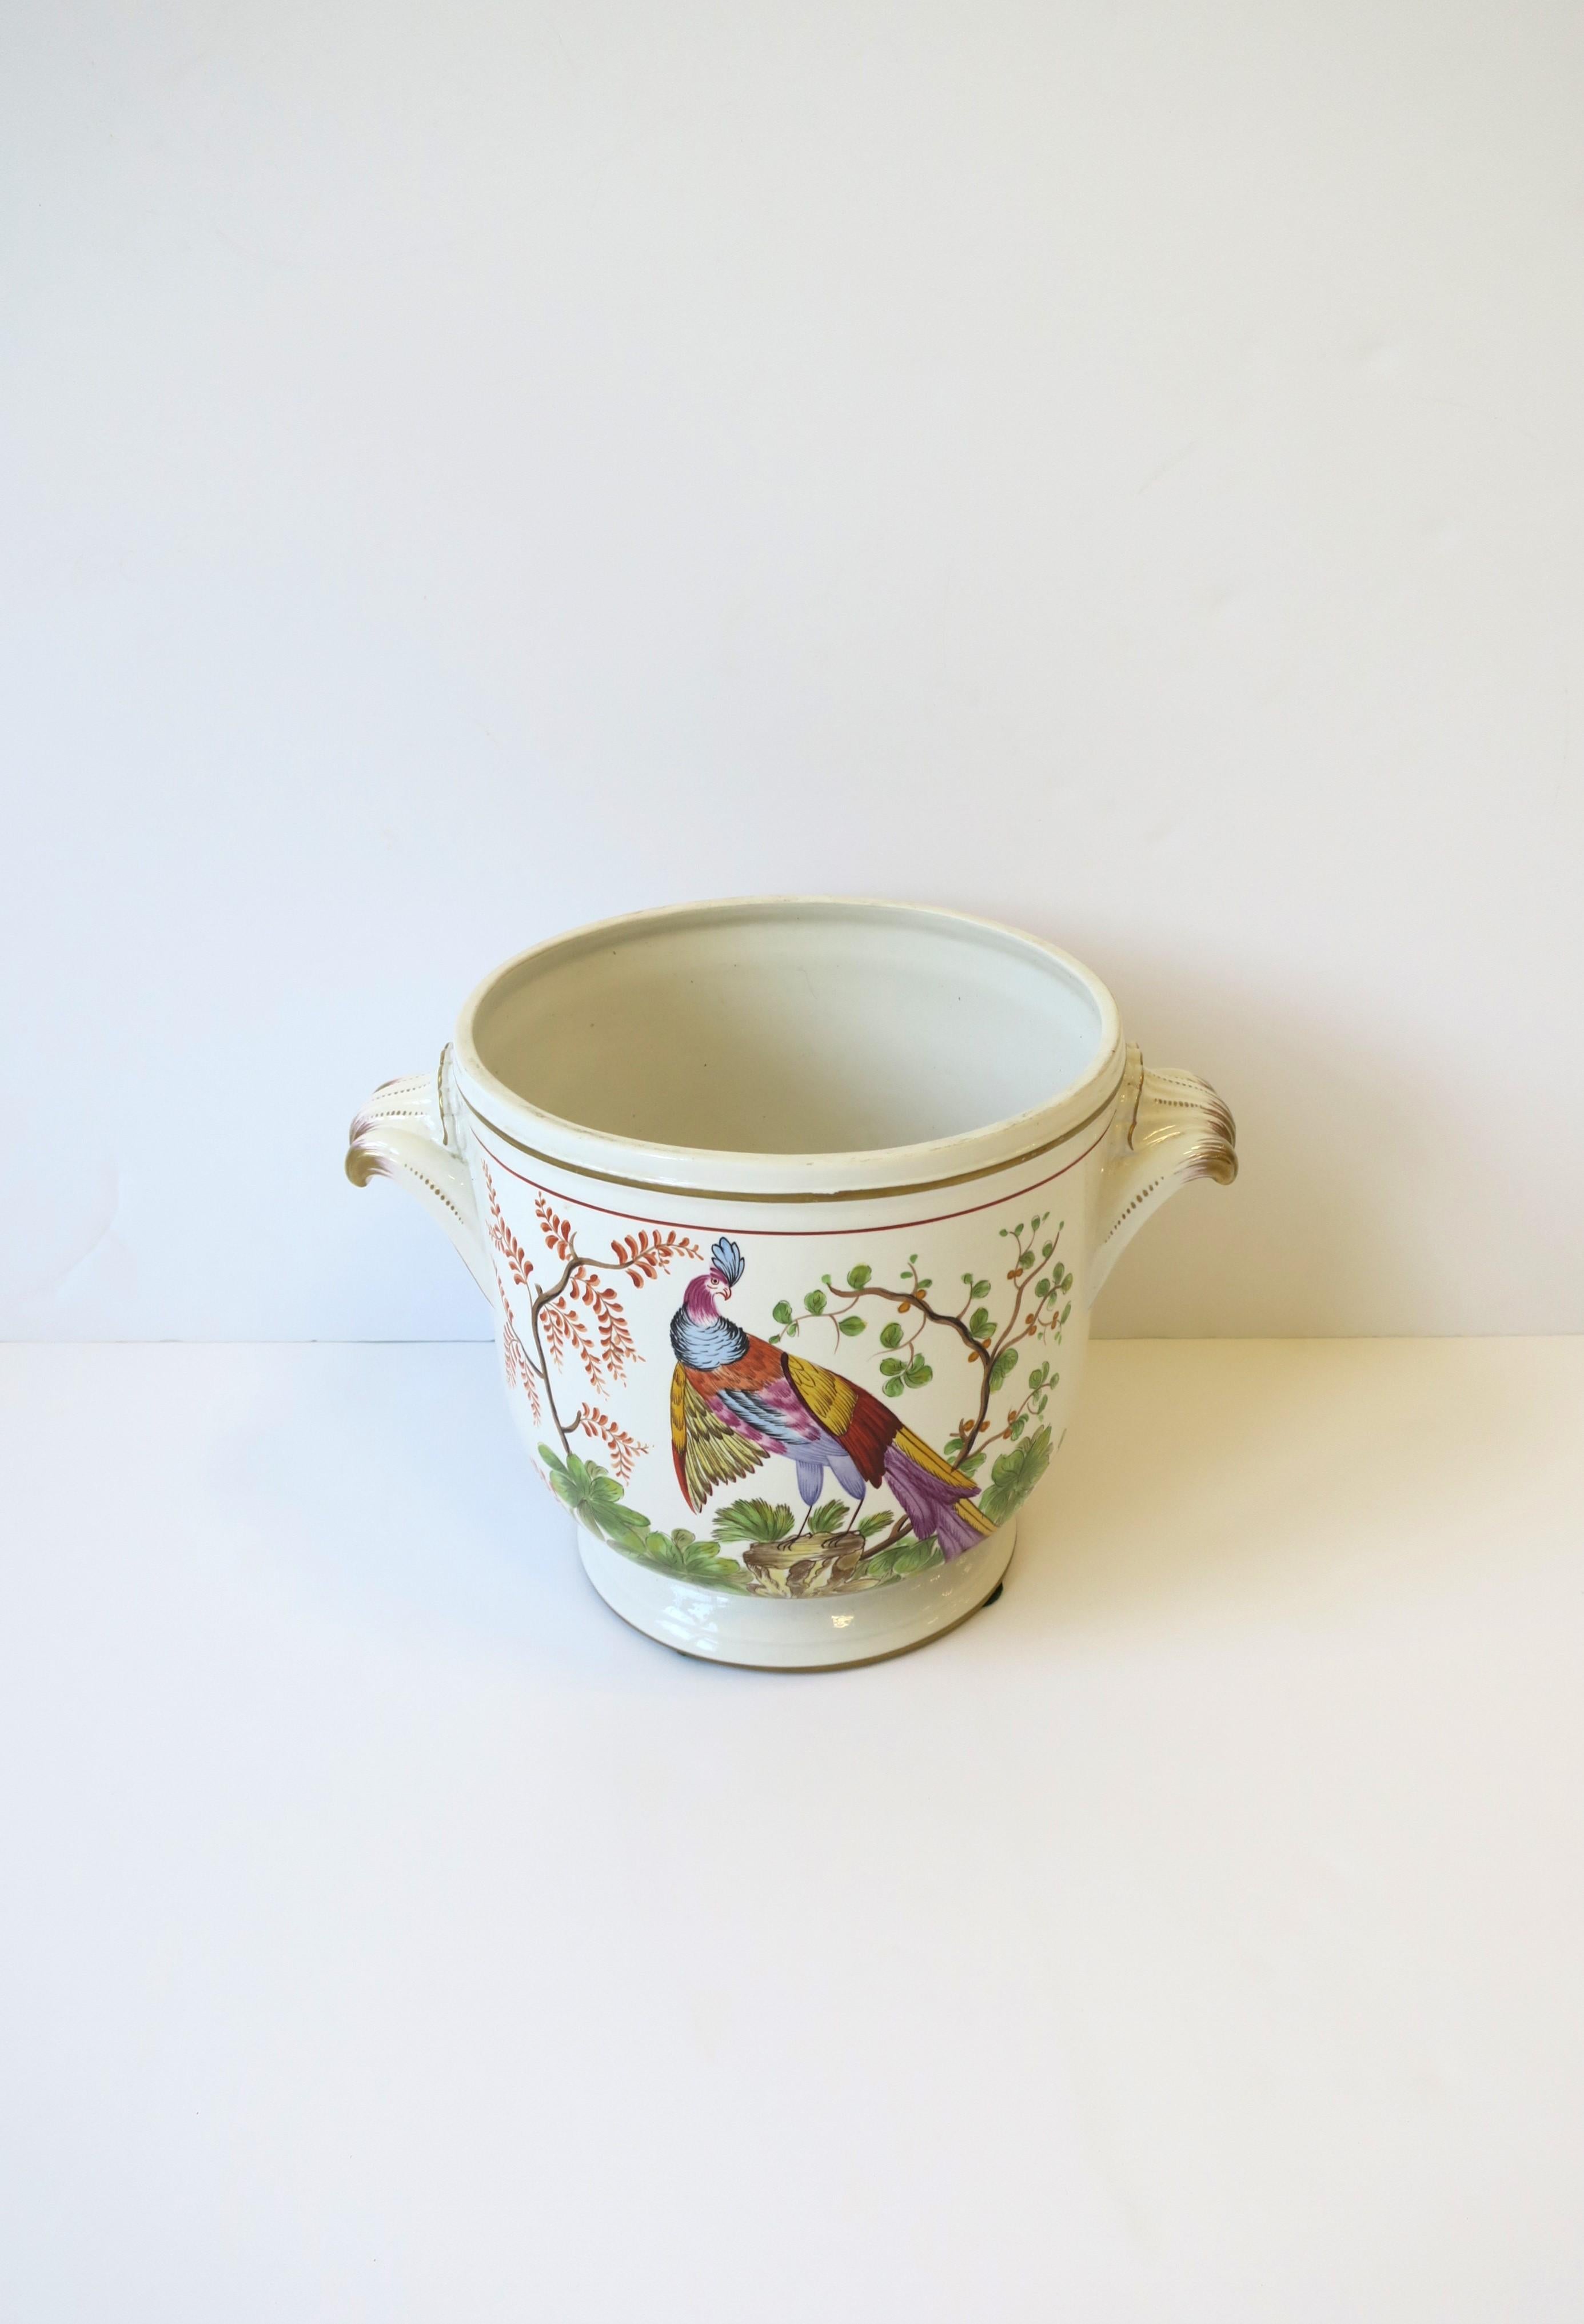 20th Century Italian Planter Cachepot Jardinière Peacock Bird by Mottahedeh, Italy For Sale